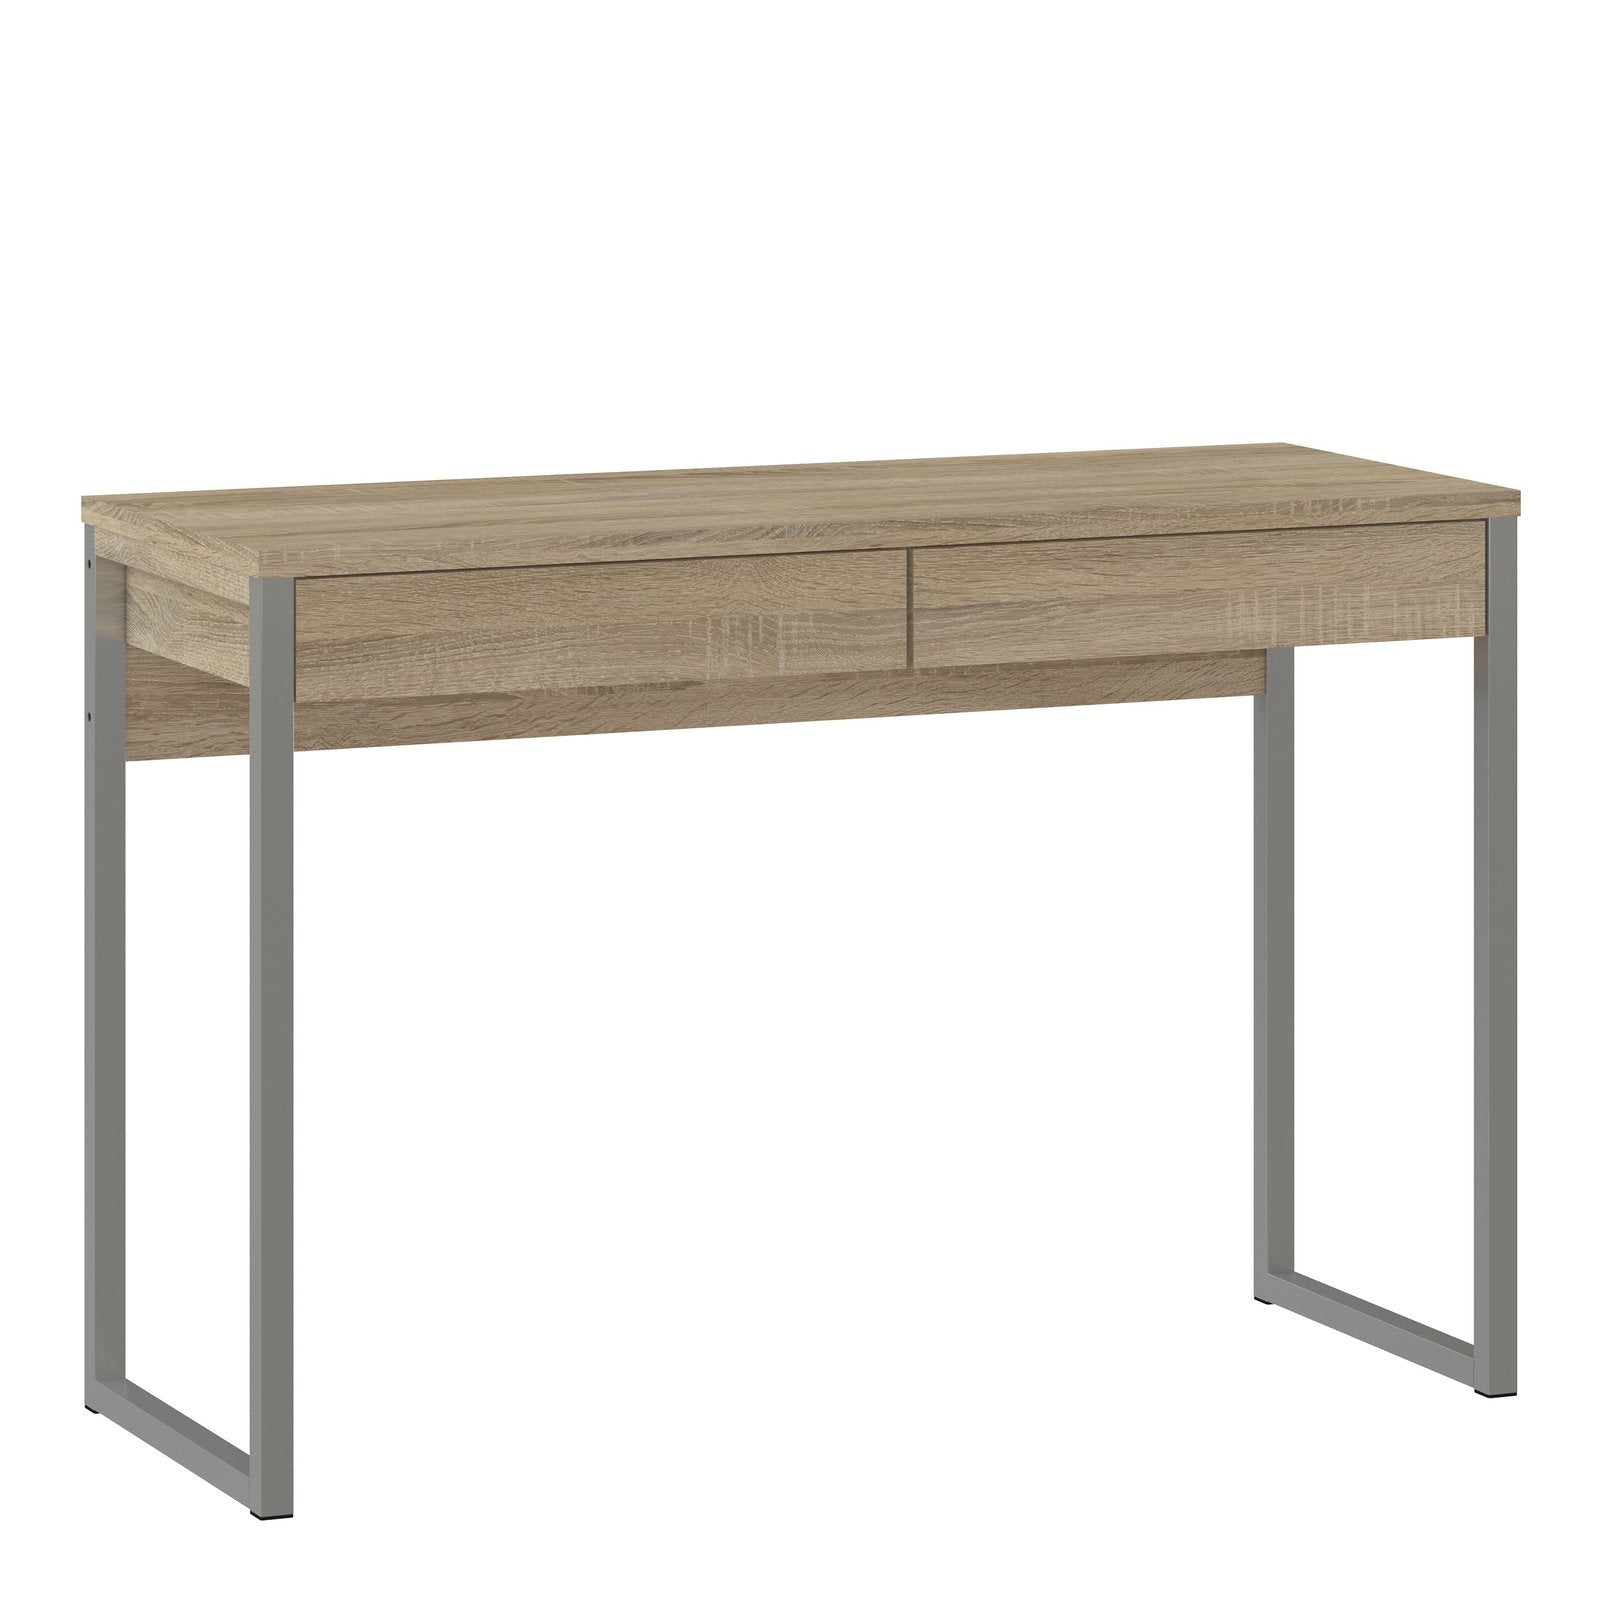 Function Plus Desk with 2 Drawers